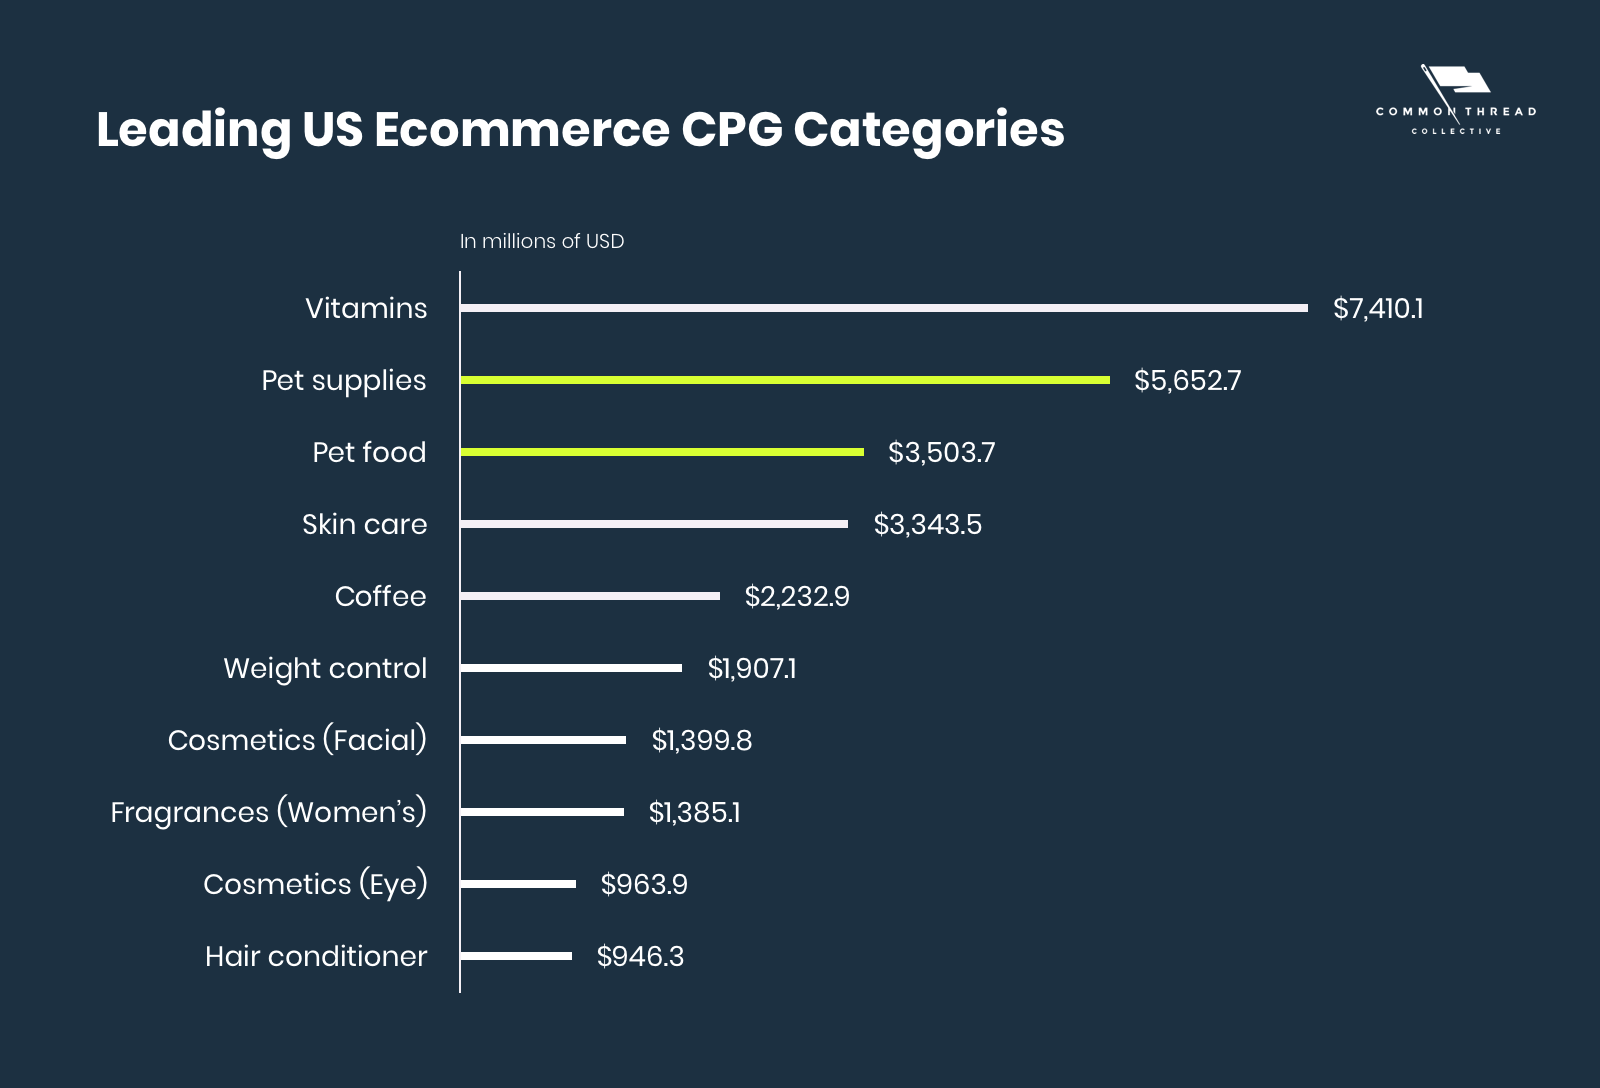 Leading US Ecommerce CPG Categories